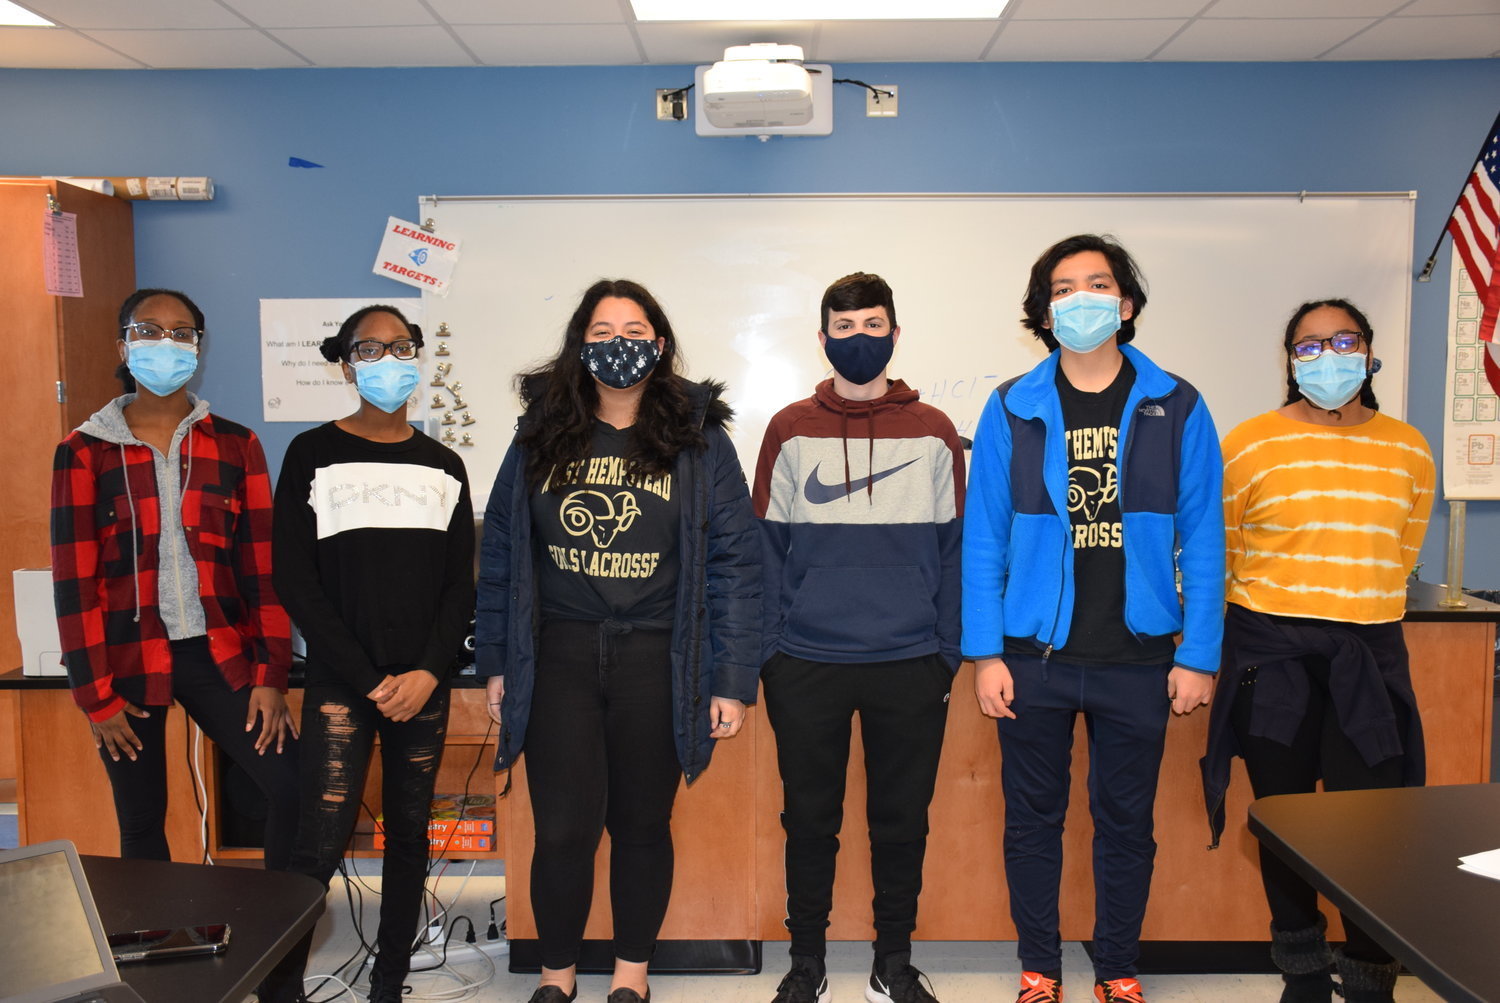 Students in schools across the Elmont Union Free School District are required to wear masks in school buildings.